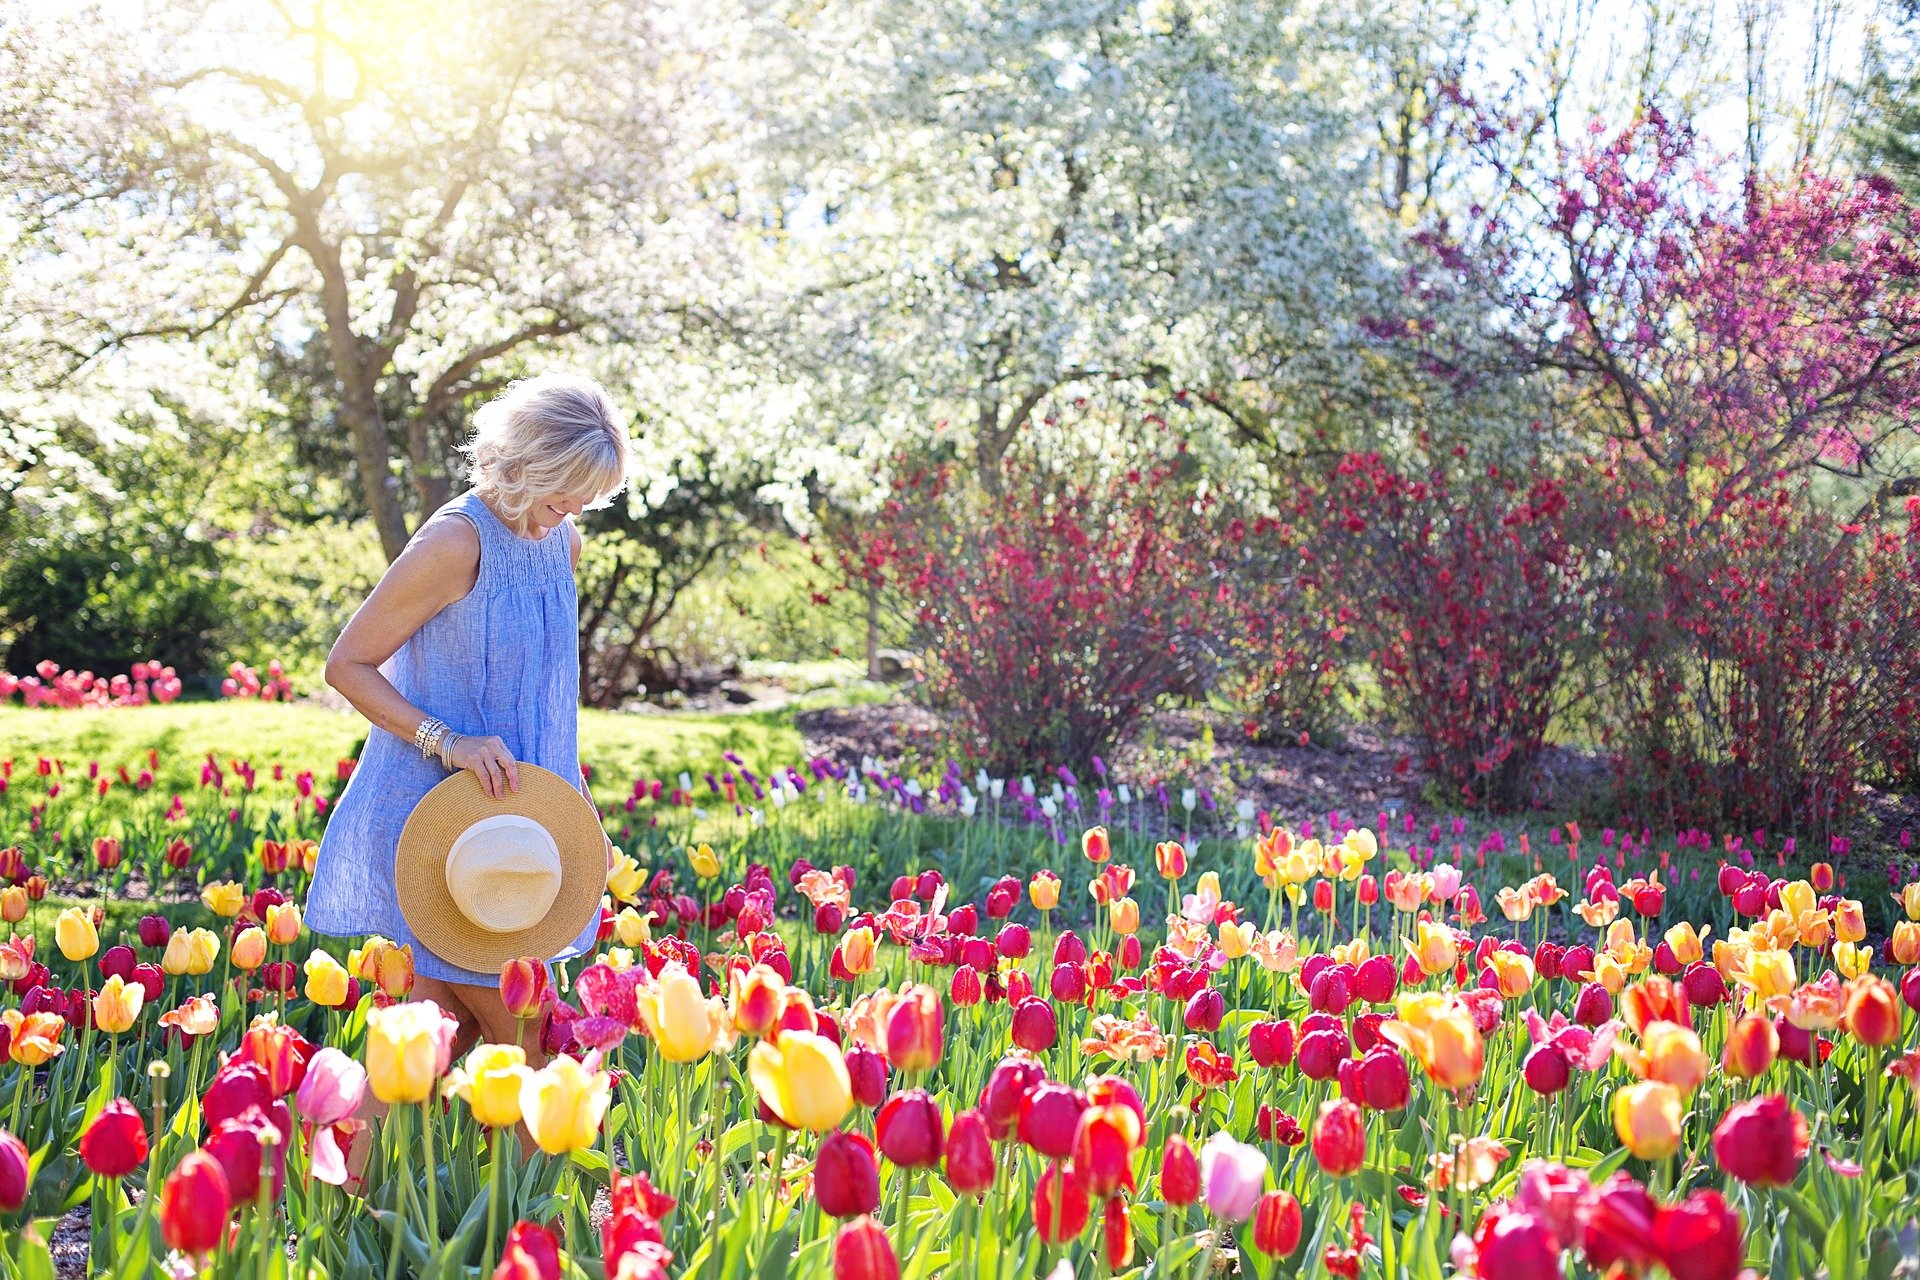 Best gifts for Mom. Woman walking through a field of flowers with a straw hat.